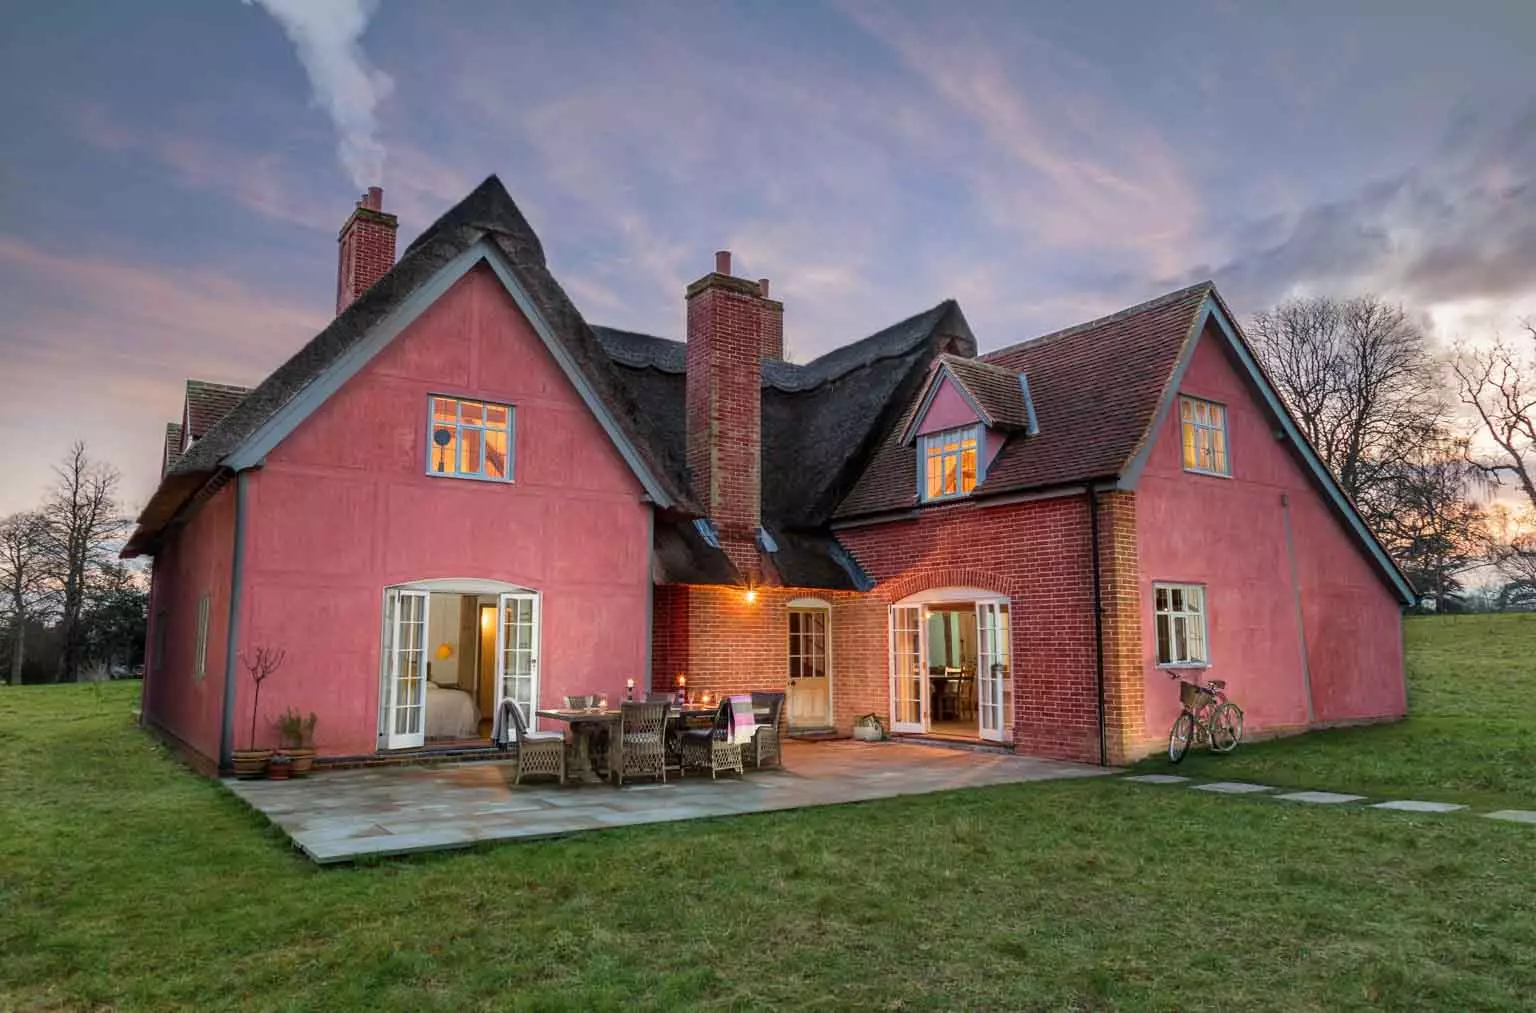 Starling farmhouse is a fabulous holiday home for large groups